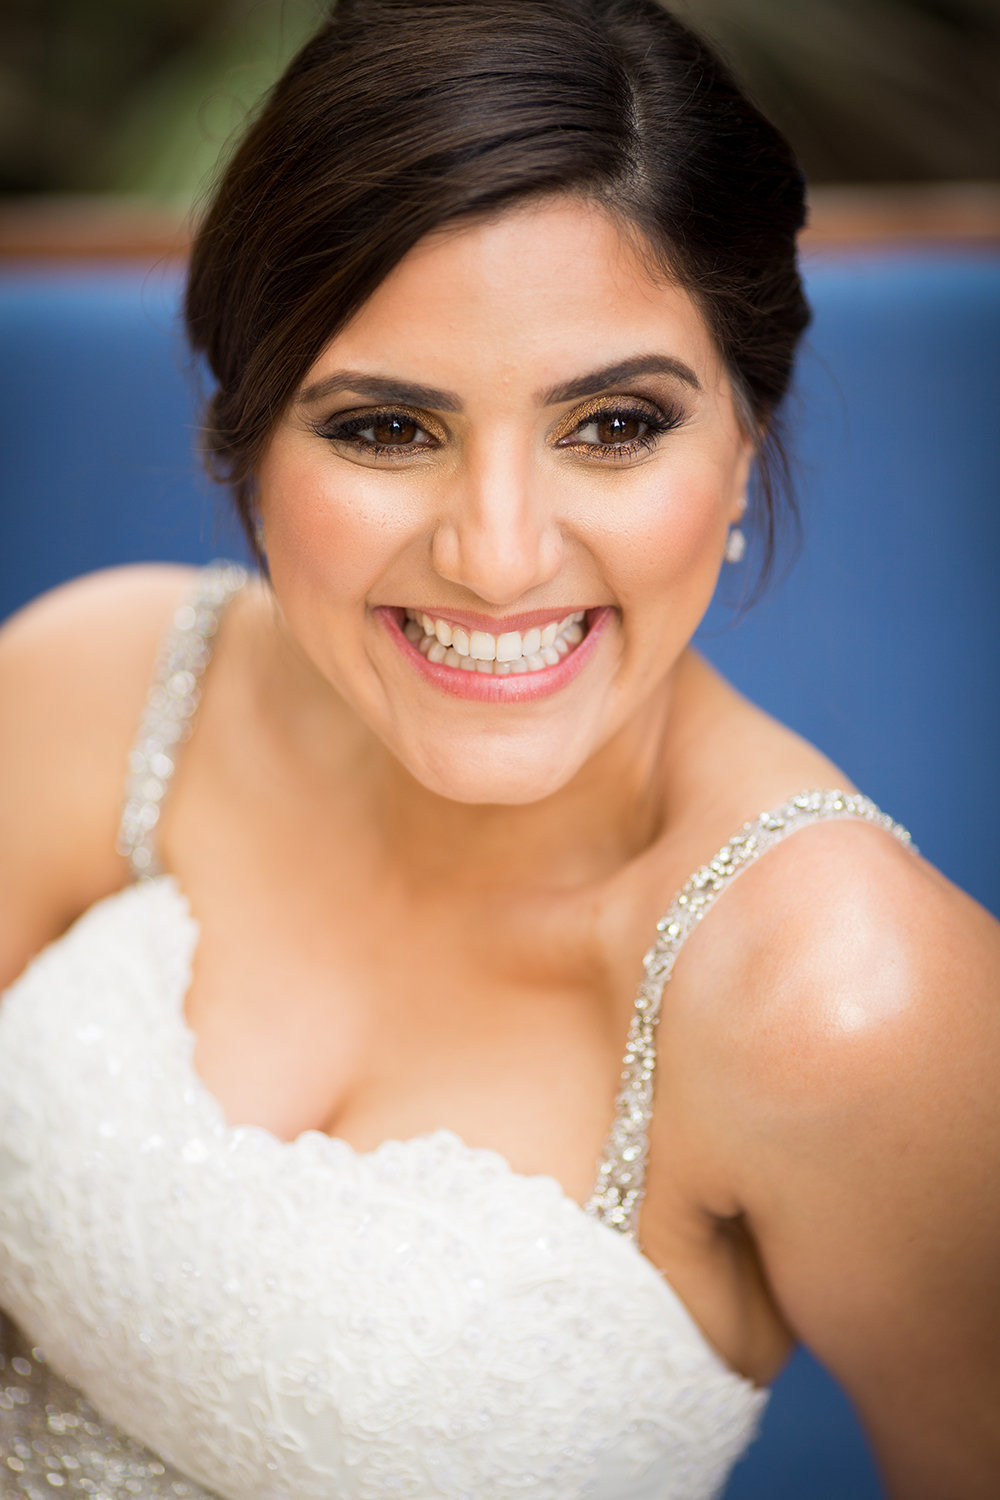 Natural lighting portrait of a beautiful bride